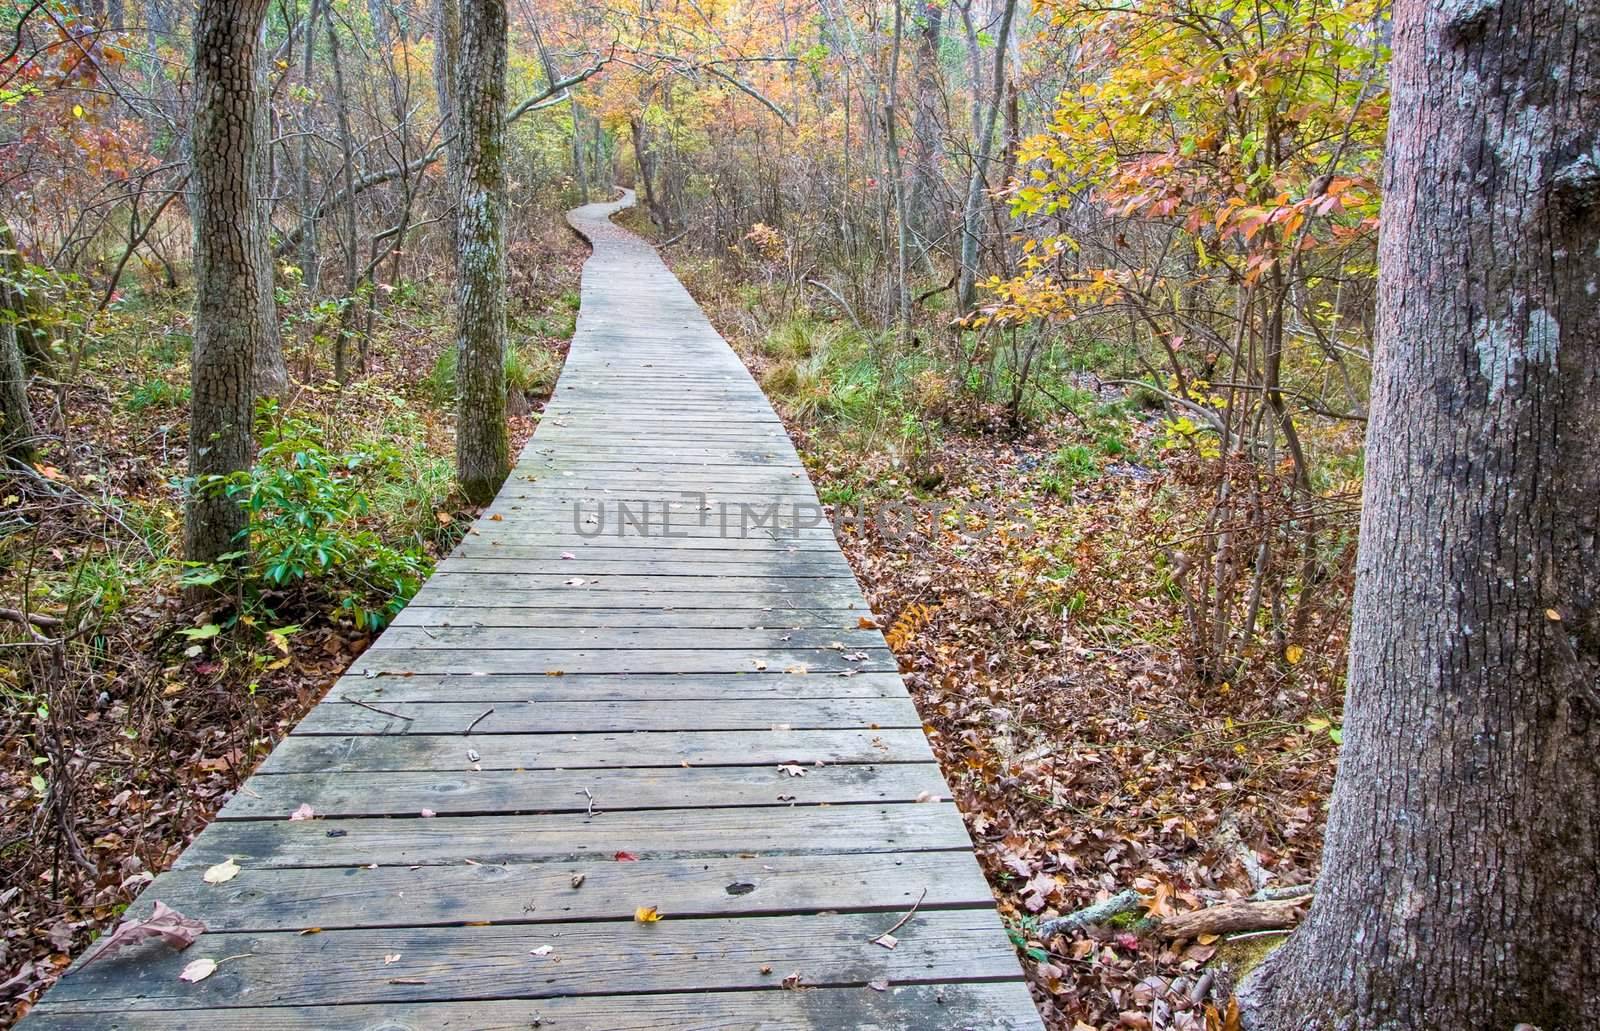 A wooden walkway on part of a trail in the woods